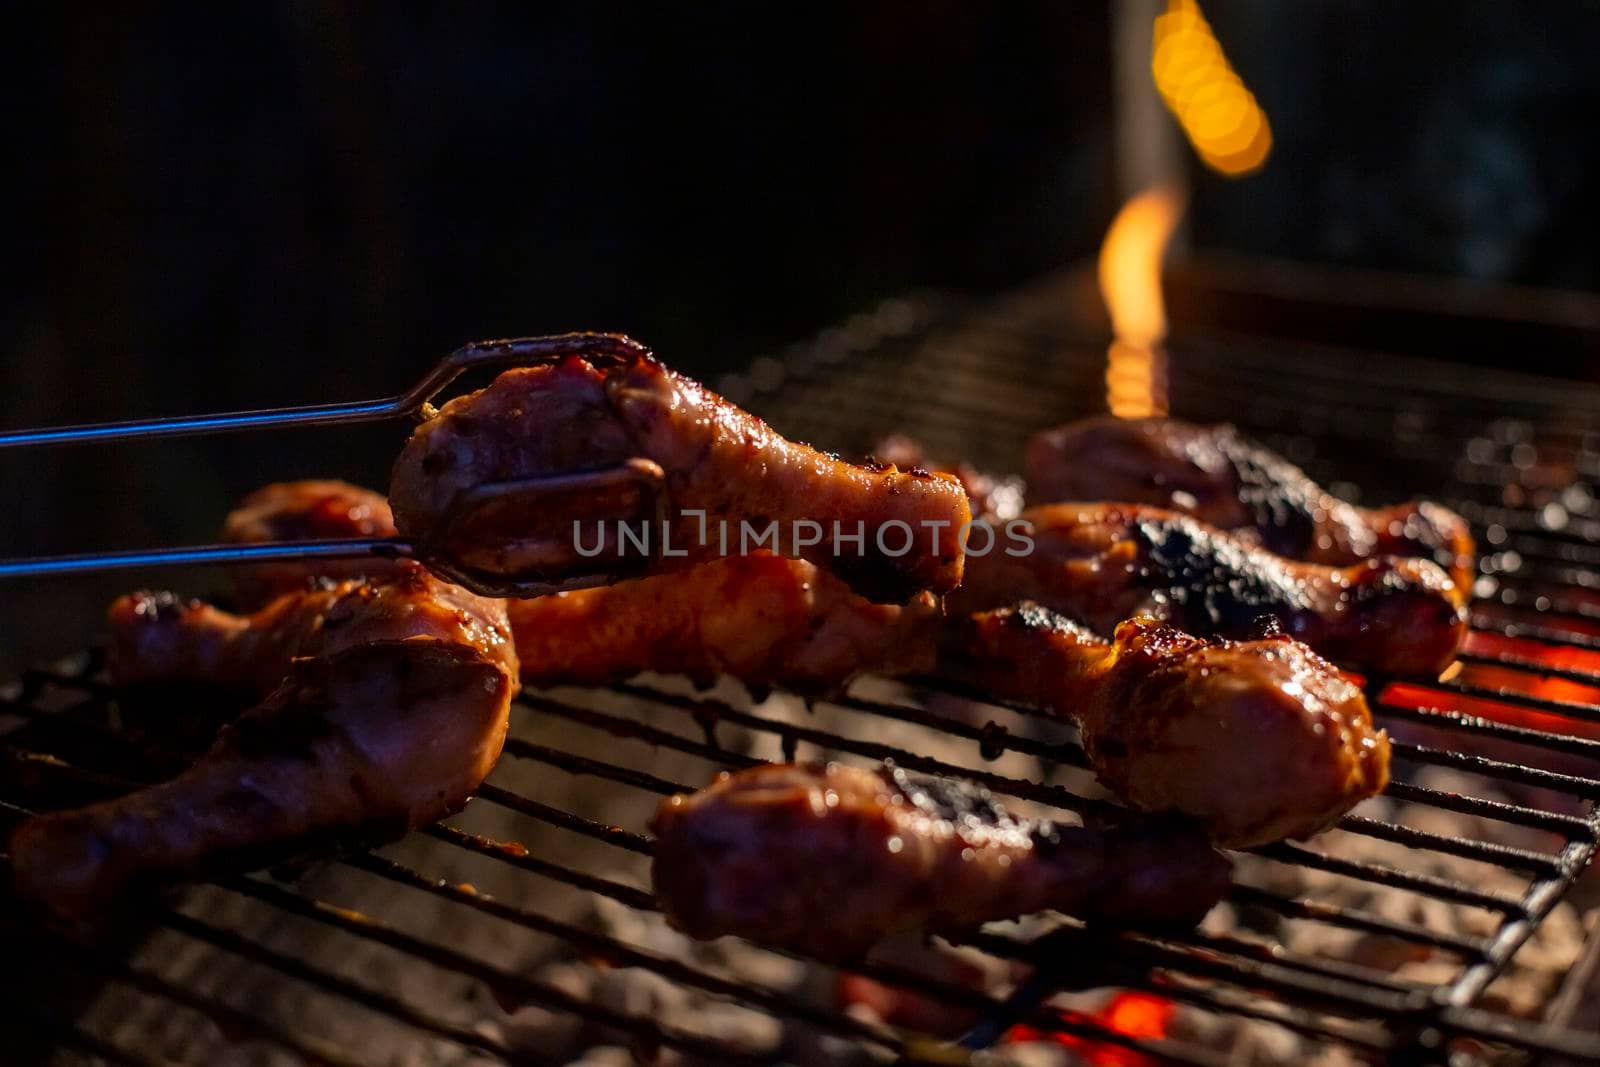 chicken drumsticks are grilled on a barbecue grill by Mariaprovector